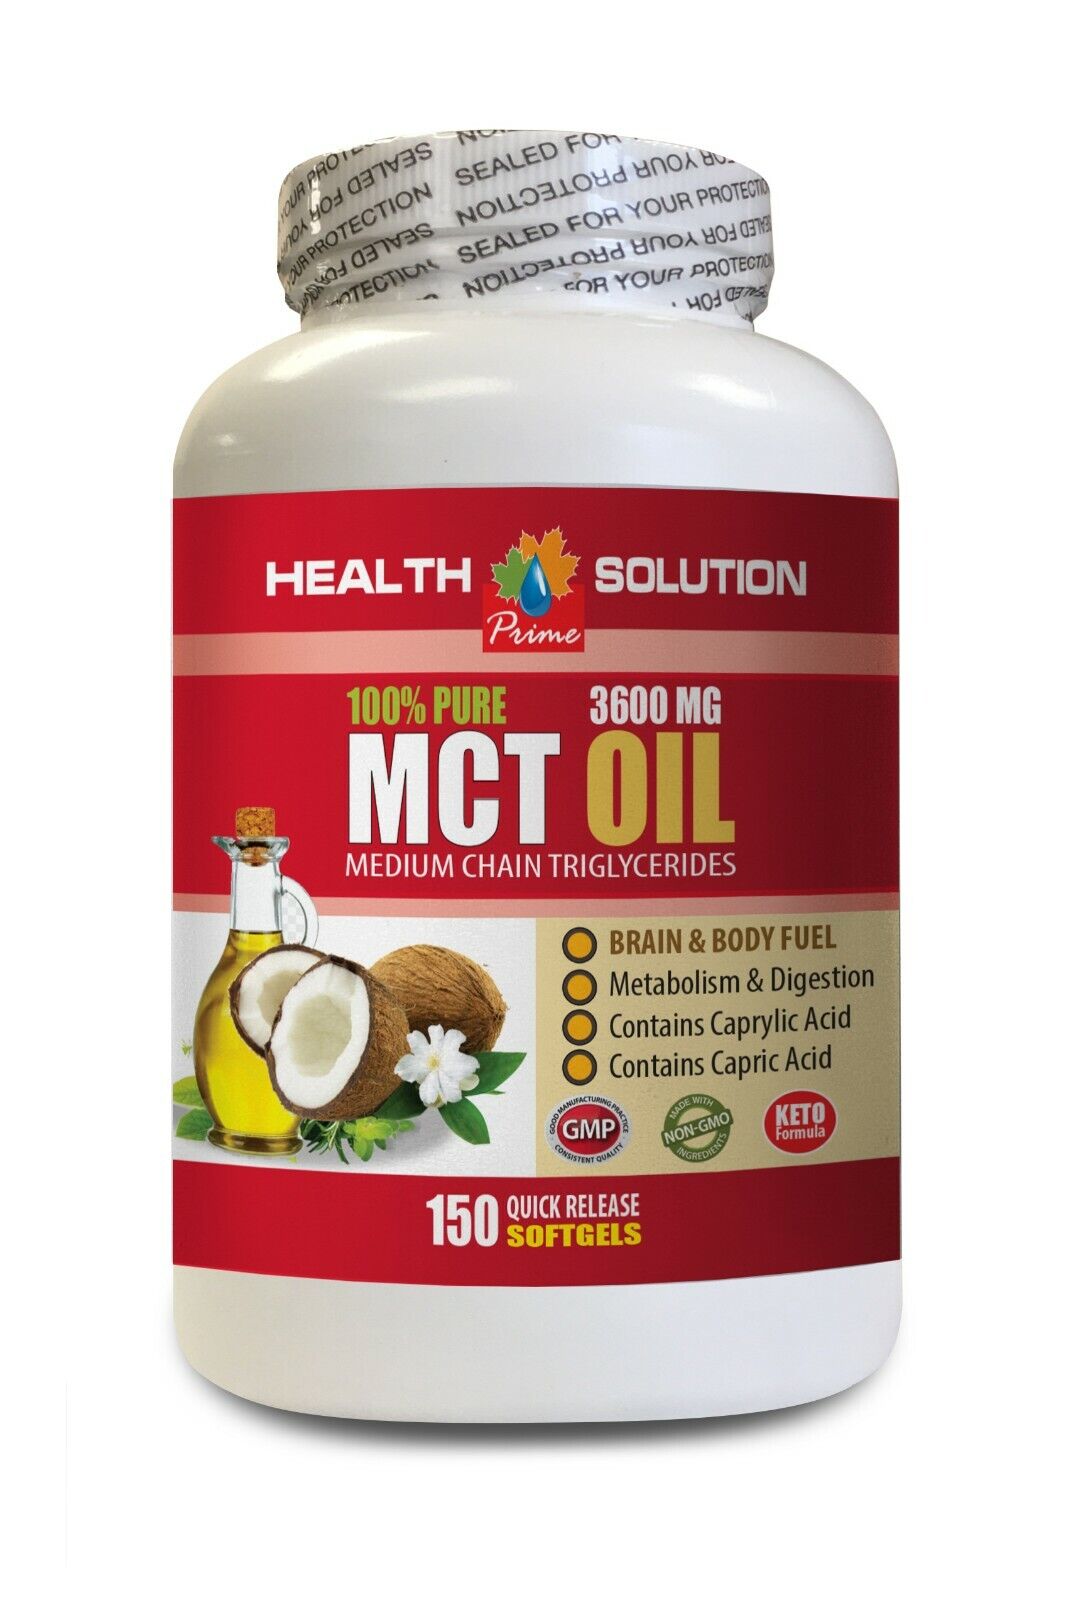 weight loss pills for women - MCT OIL PURE - medium chain coconu